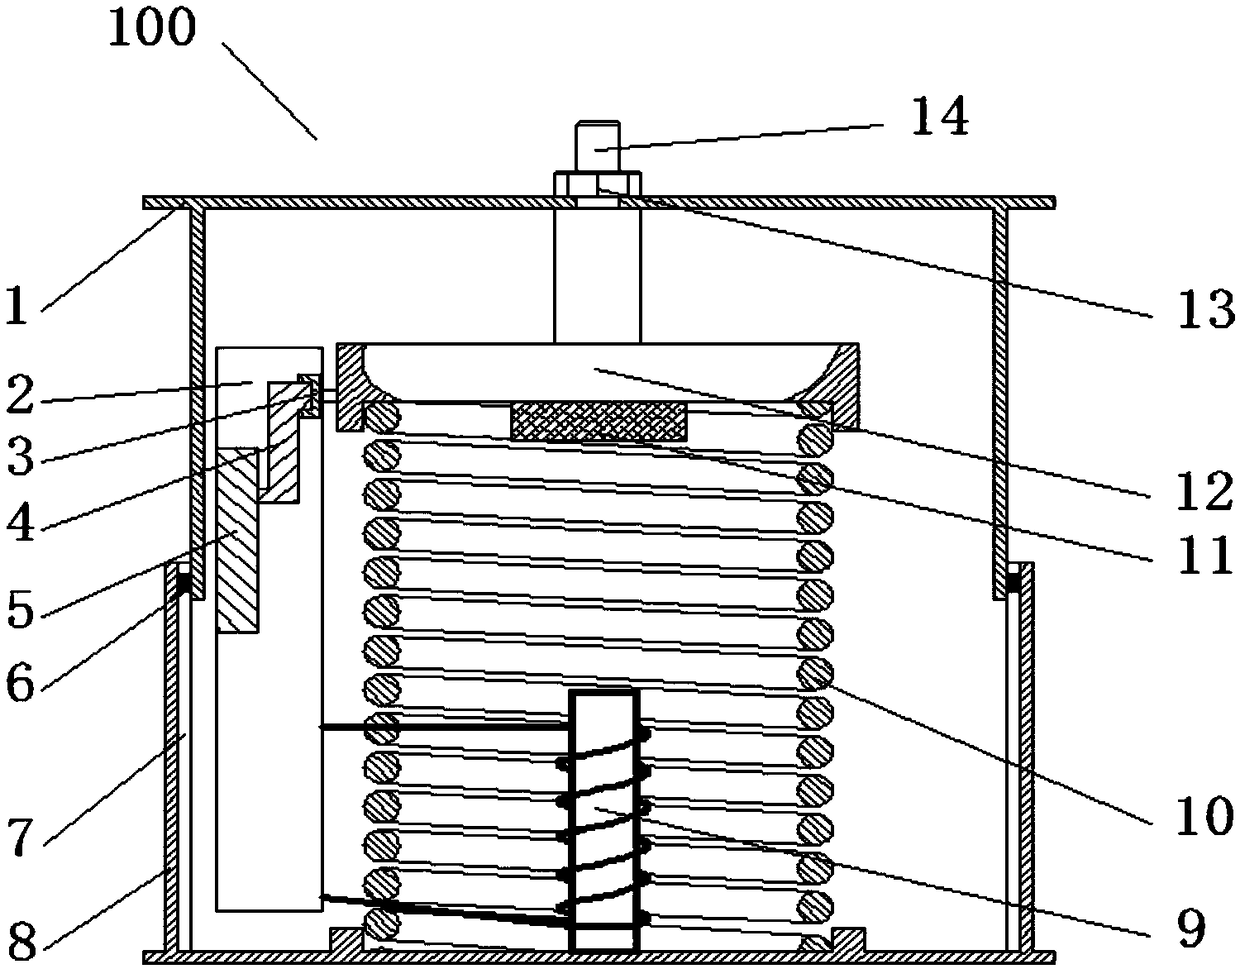 Spring and electromagnetism assist damping device